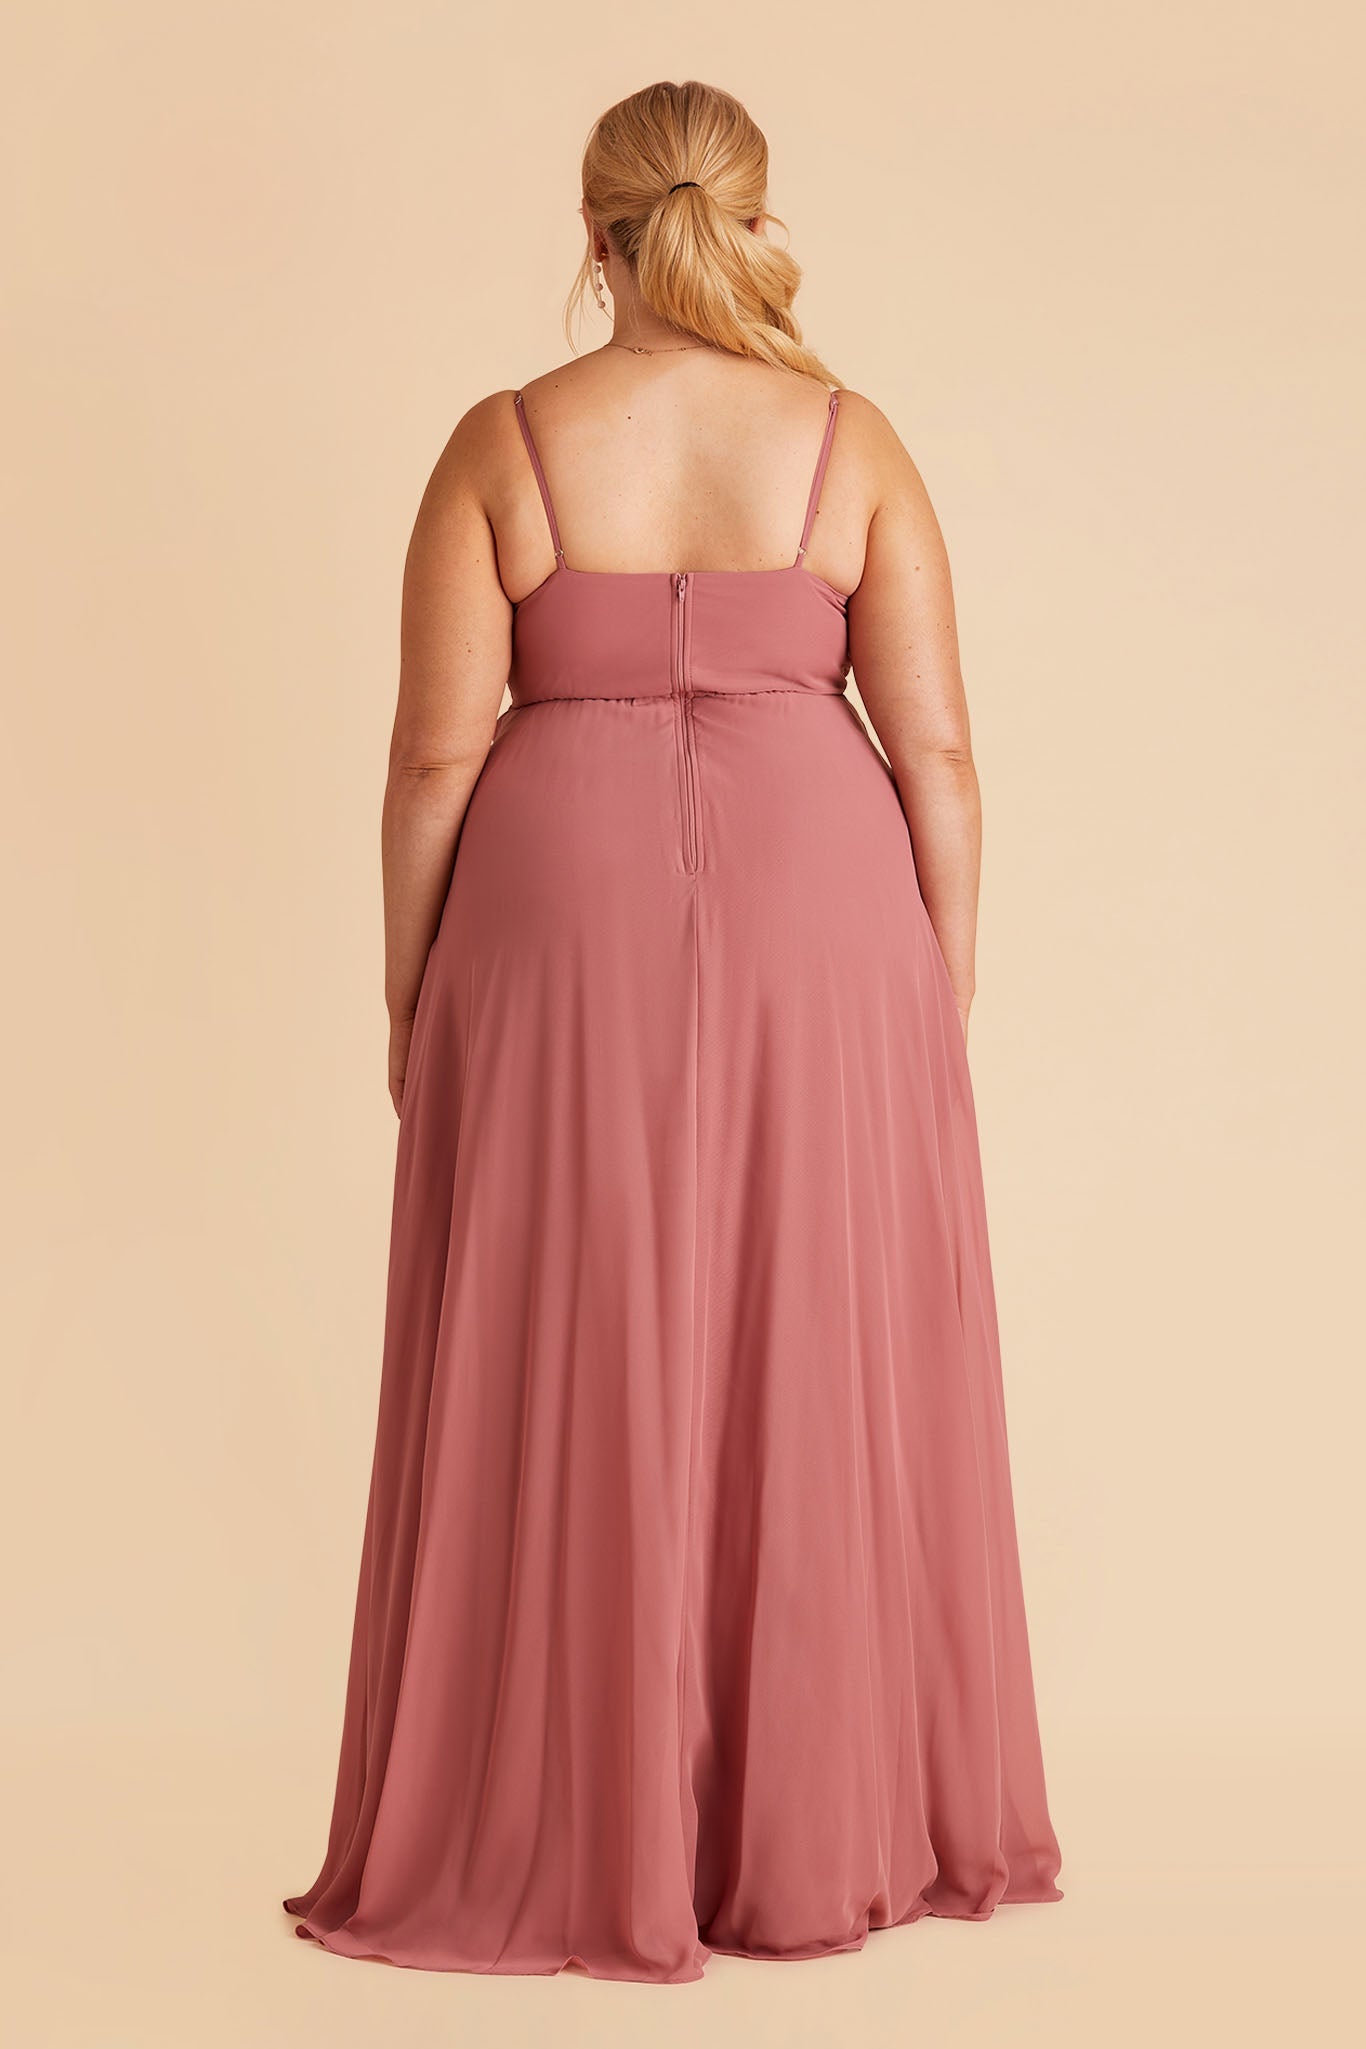 Kaia plus size bridesmaids dress in mulberry chiffon by Birdy Grey, back view